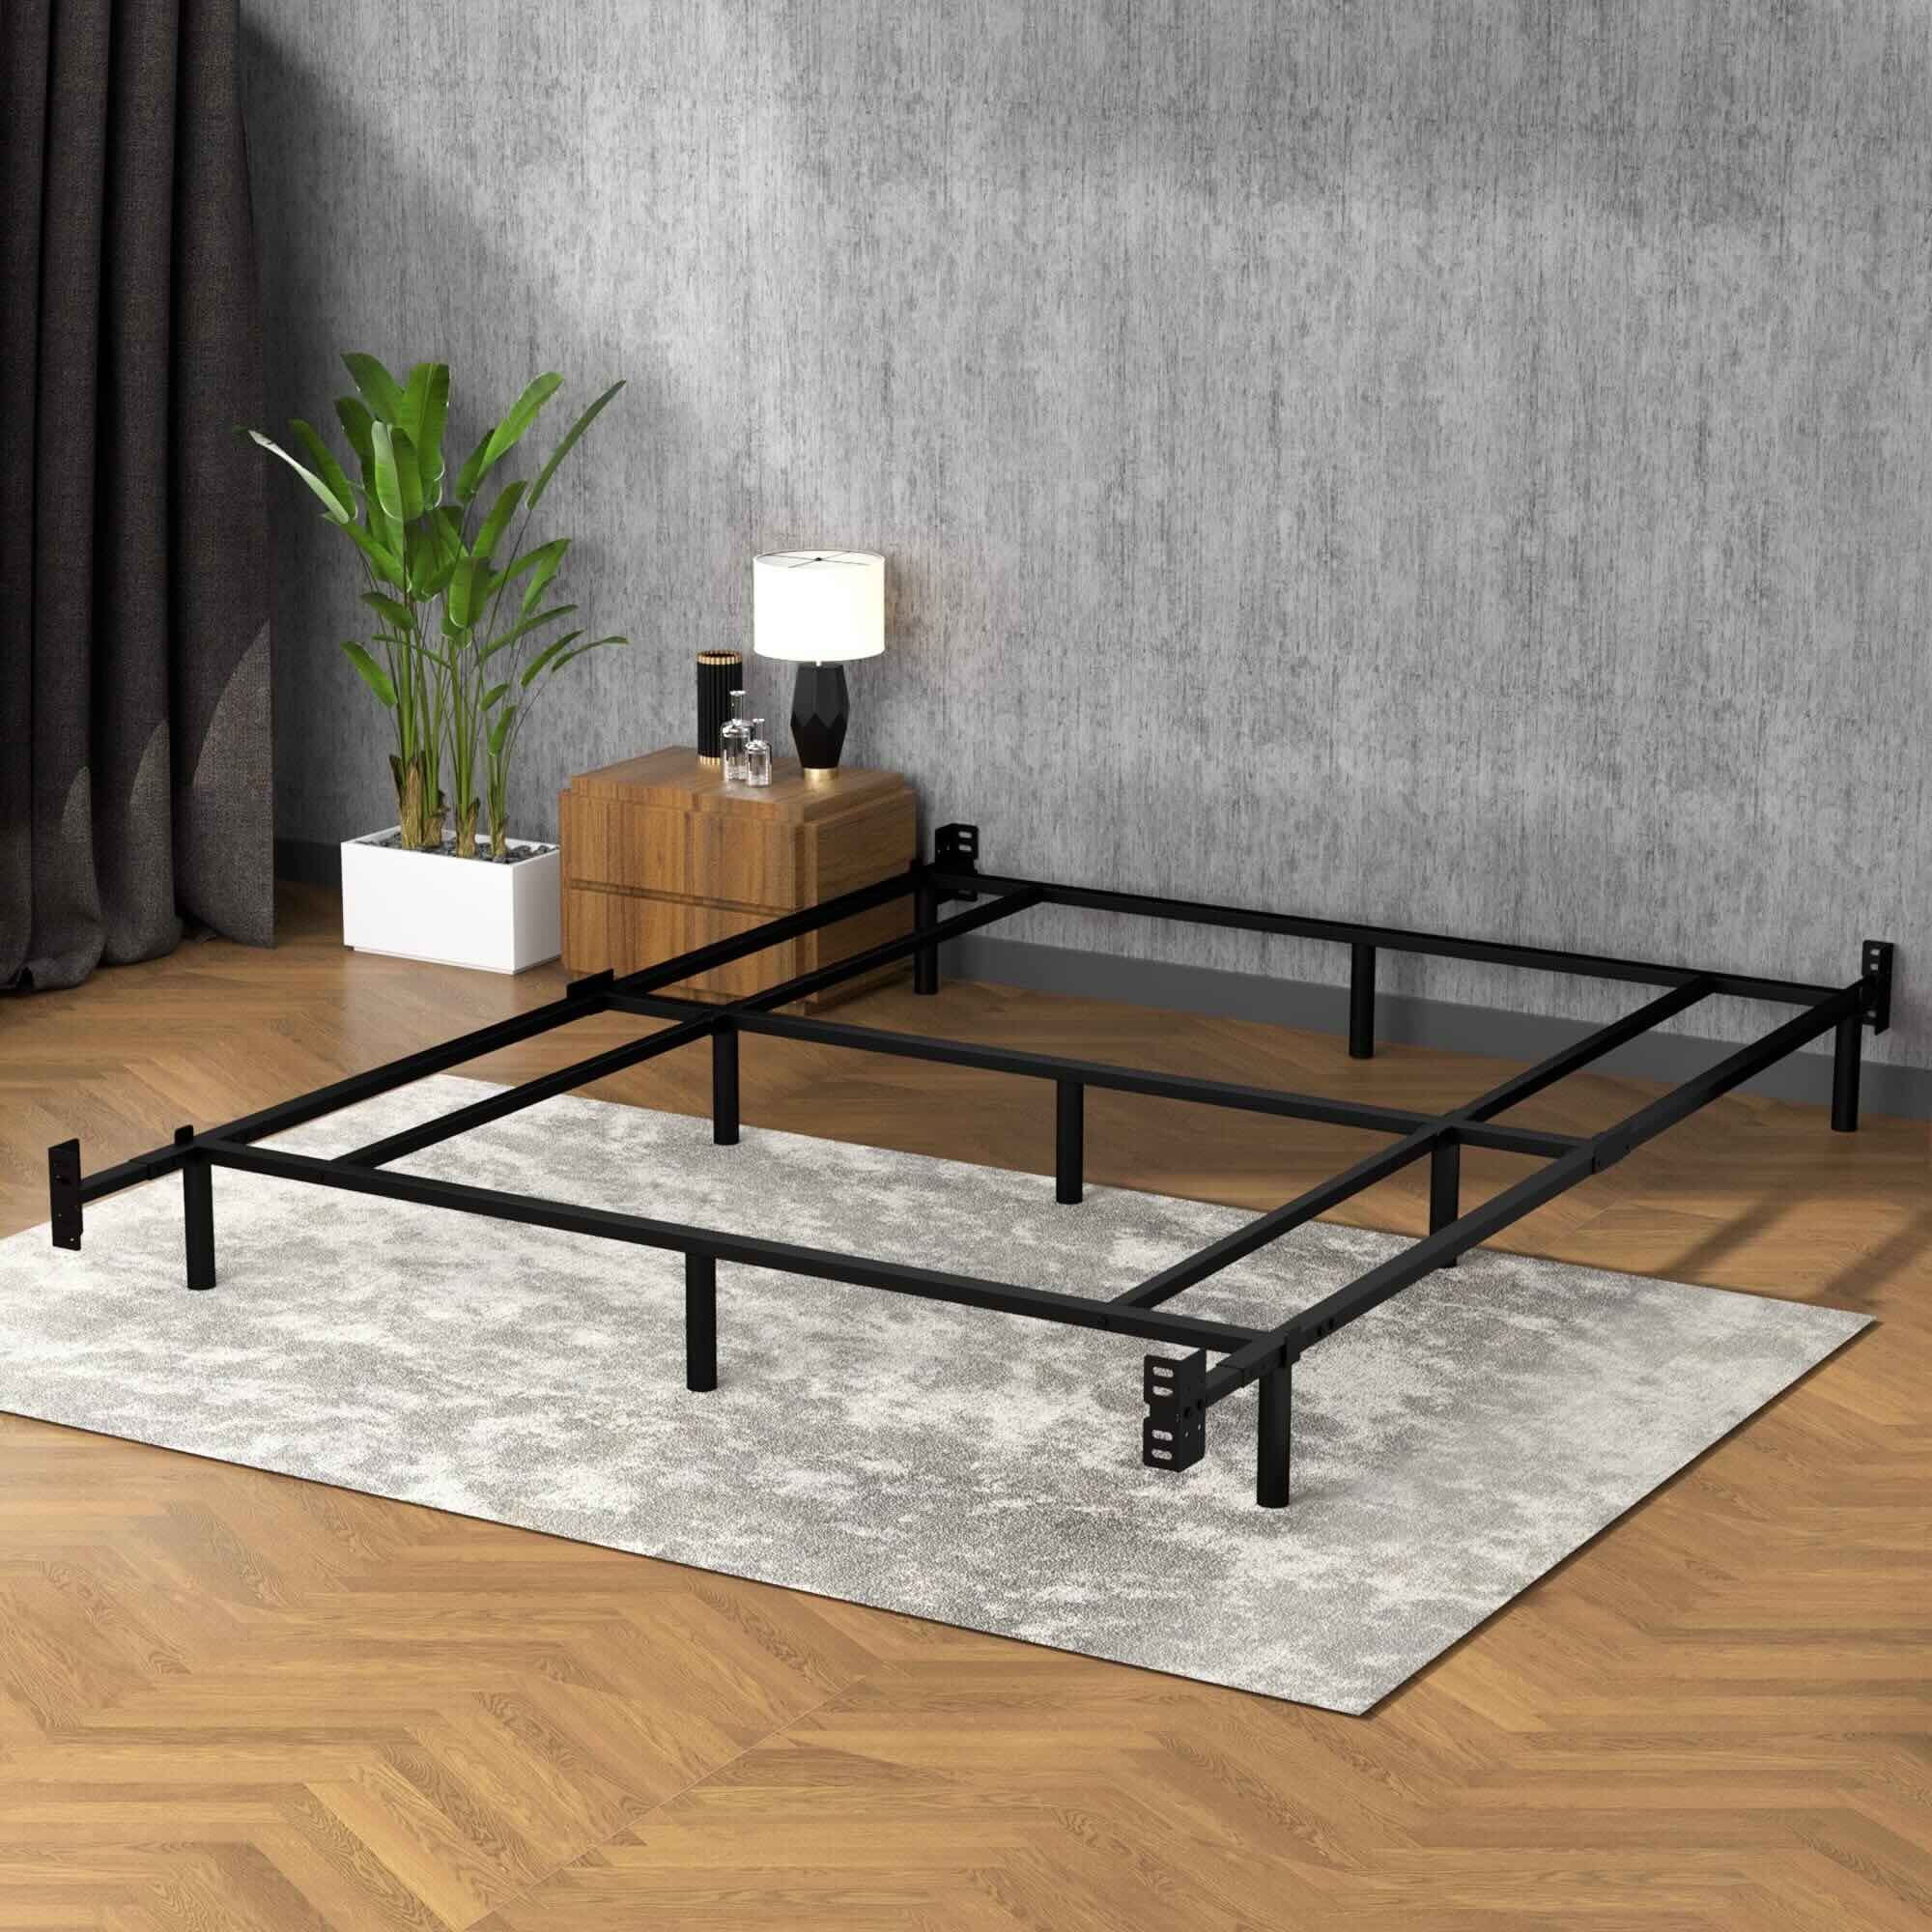 How To Assemble A Queen Size Bed Frame